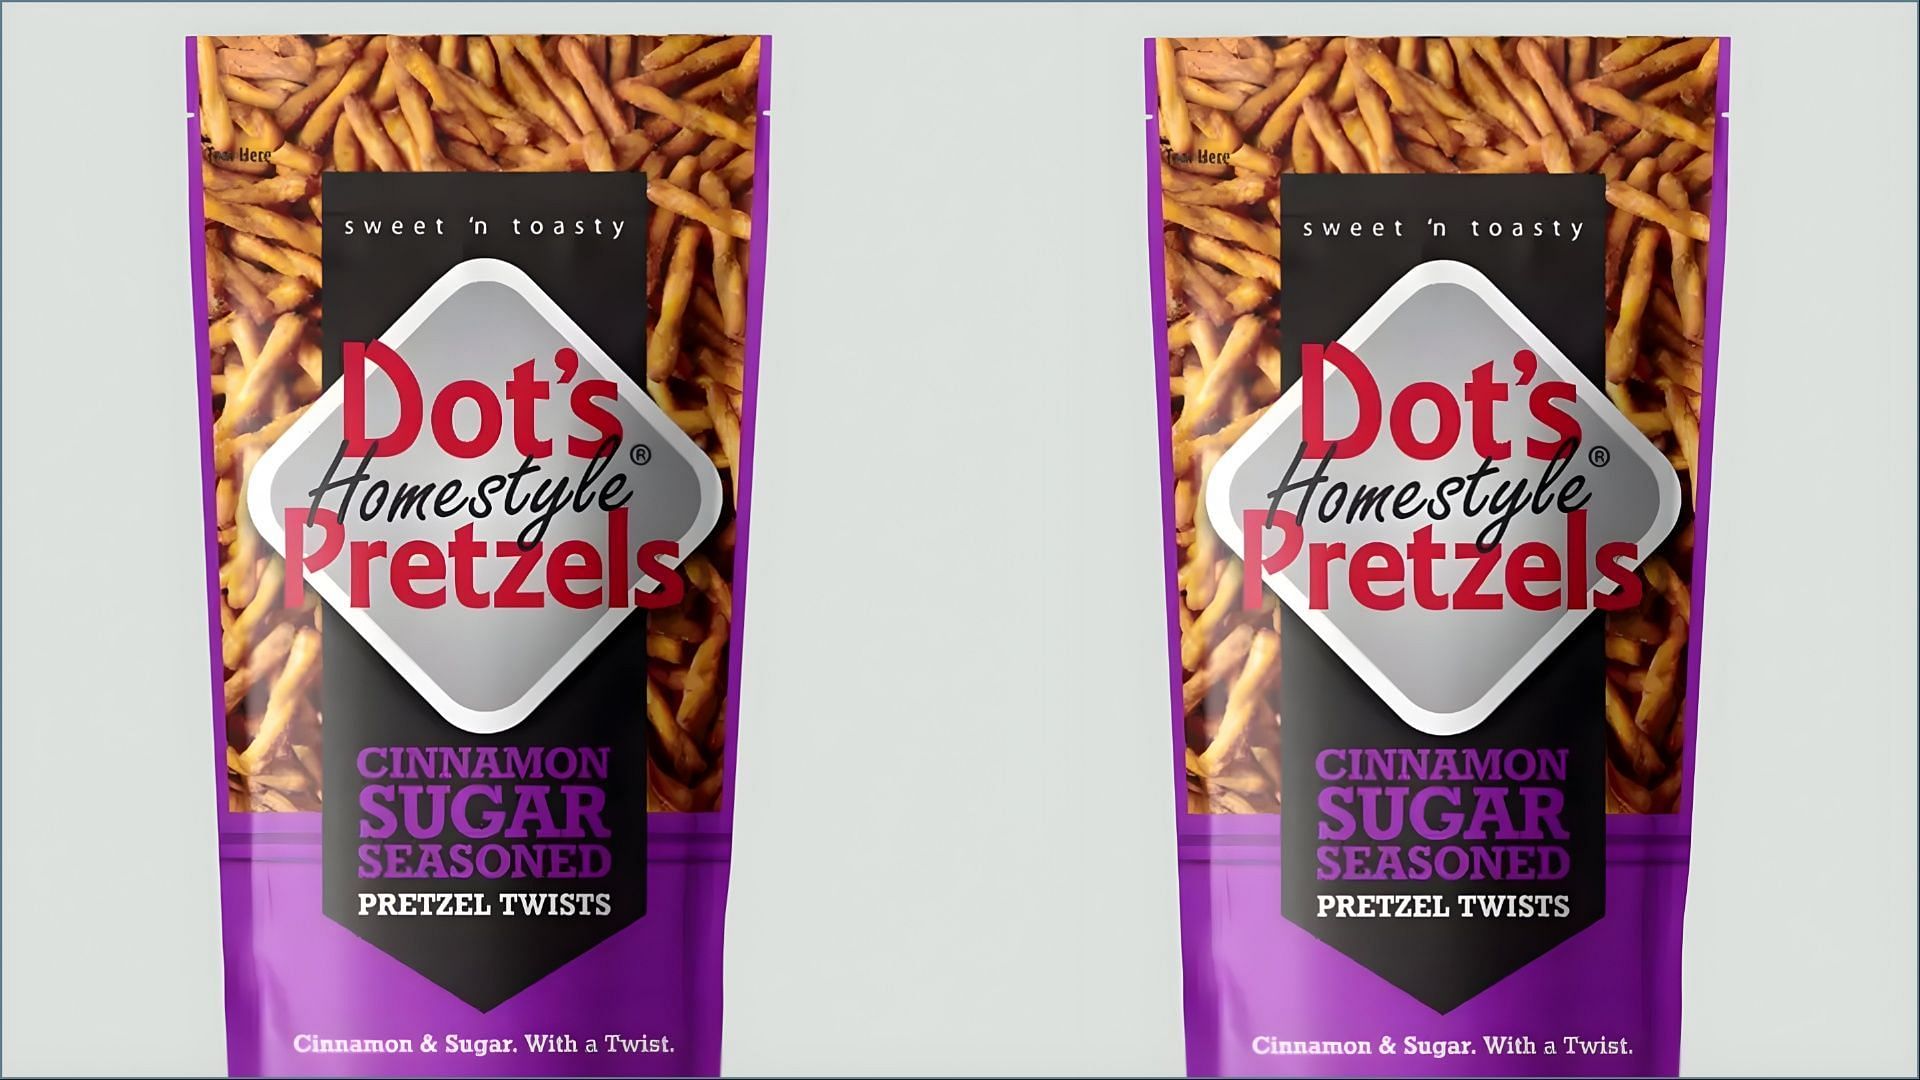 The Dots Cinnamon Sugar Pretzels are sold at Costco for over $10 (Image via HersheyLand)